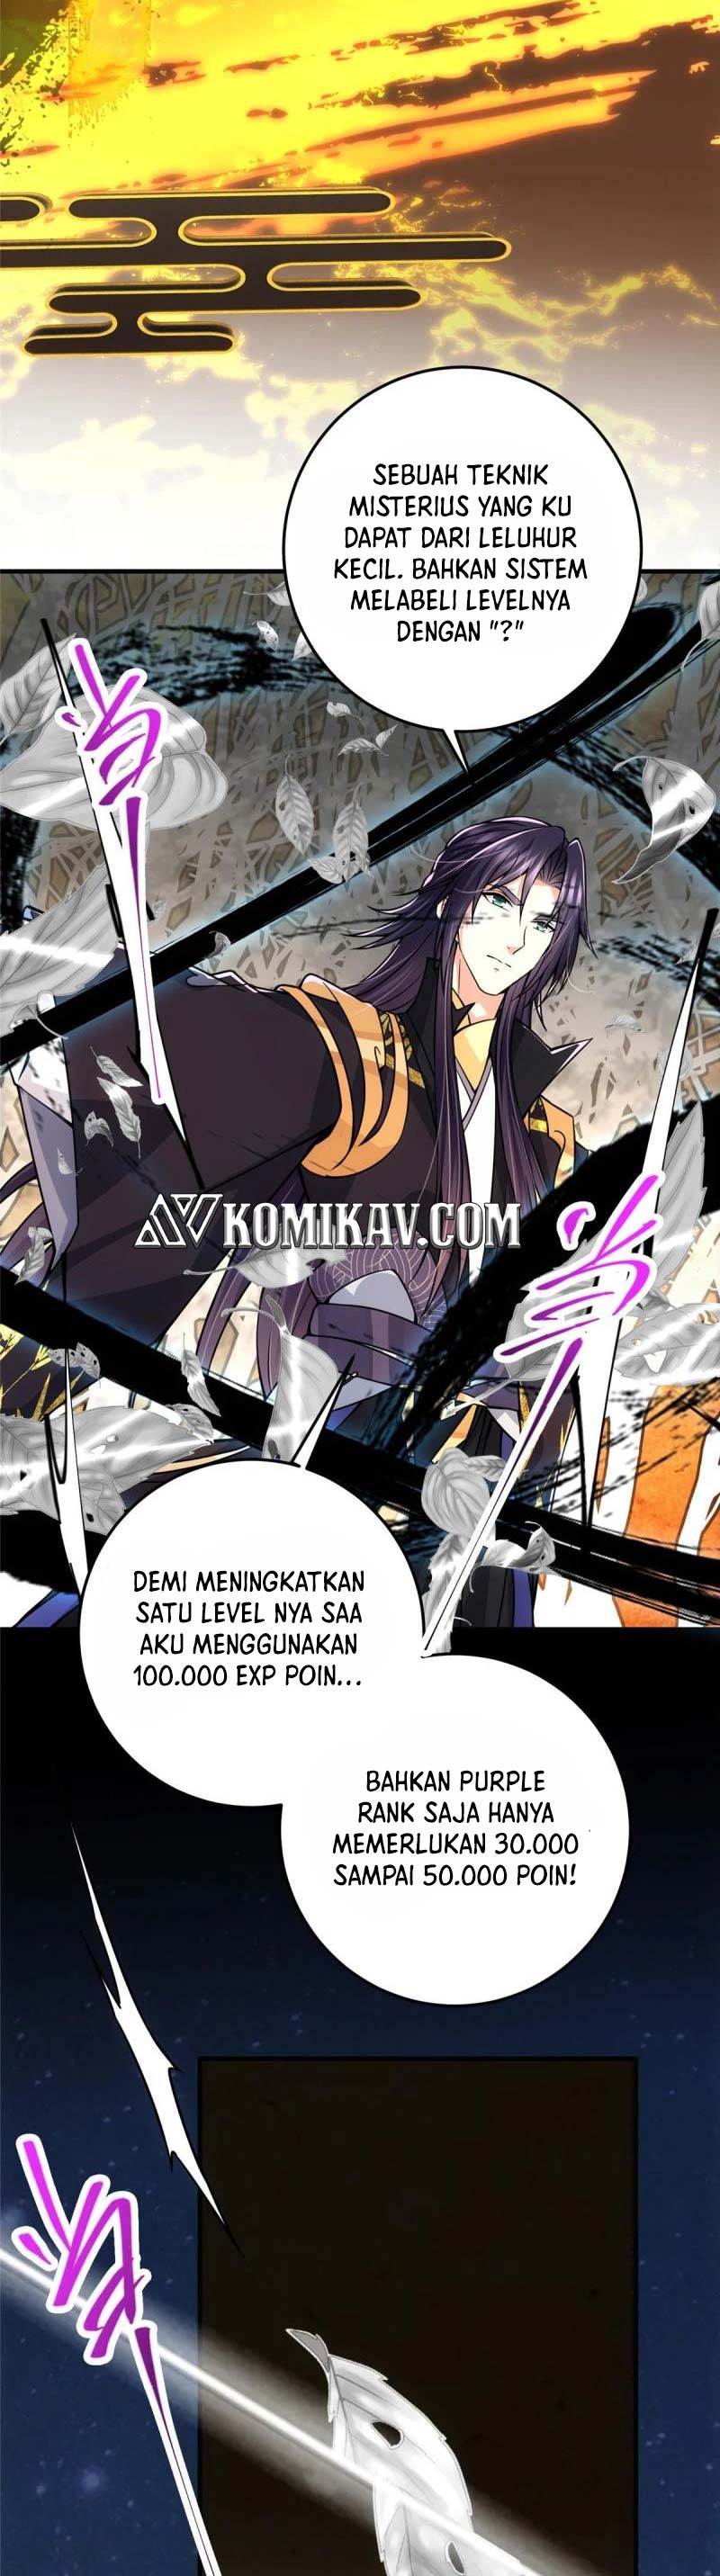 Keep A Low Profile, Sect Leader Chapter 91 Bahasa Indonesia